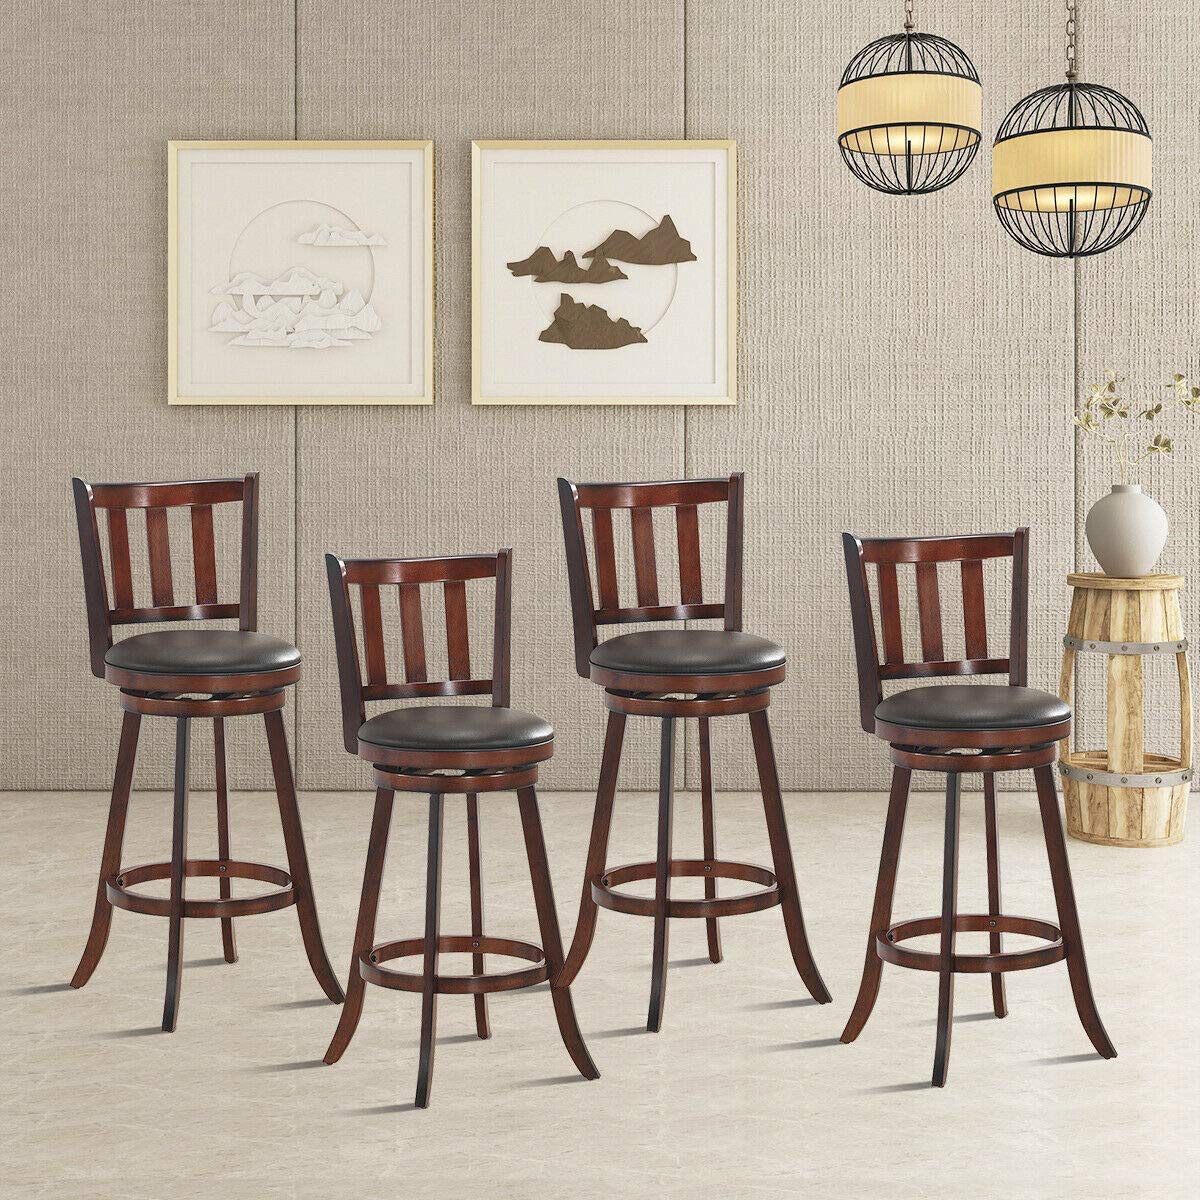 Bar Stools Set of 2 or 4, Counter Height Dining Chair, Fabric Upholstered 360 Degree Swivel